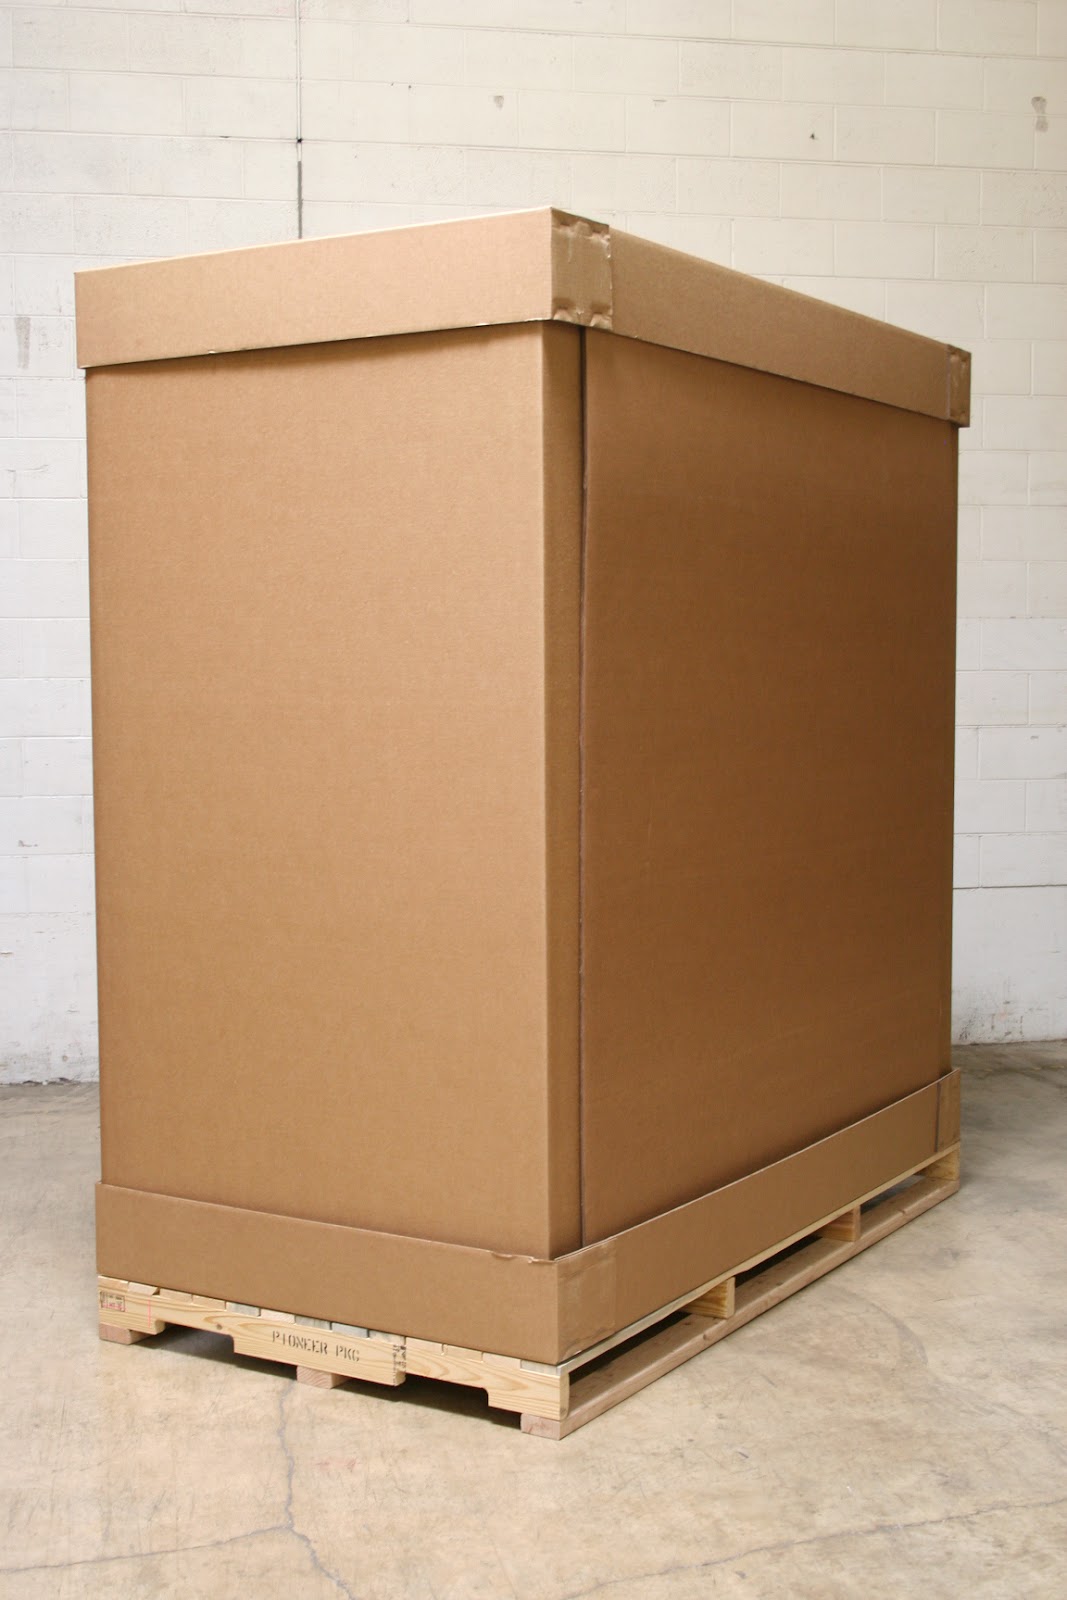 Ox Box Triple Wall Corrugated Large Moving Crate Boxes